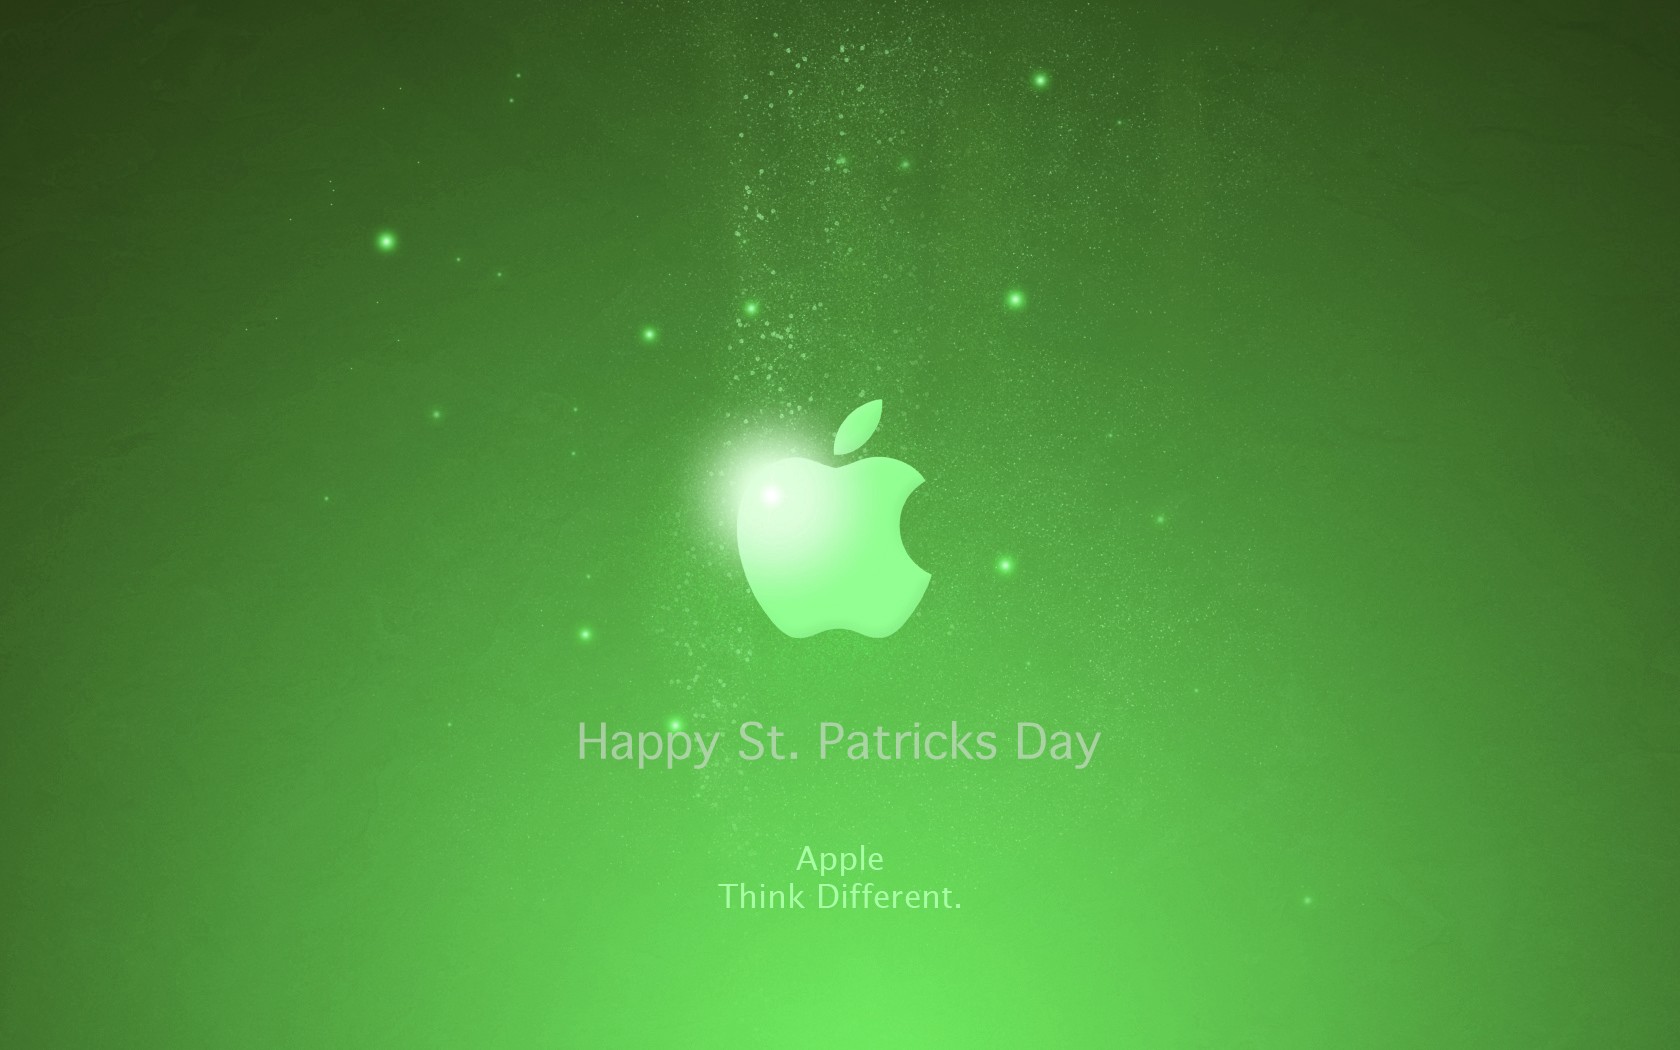 st patrick's day wallpapers Archives - Latest Updates